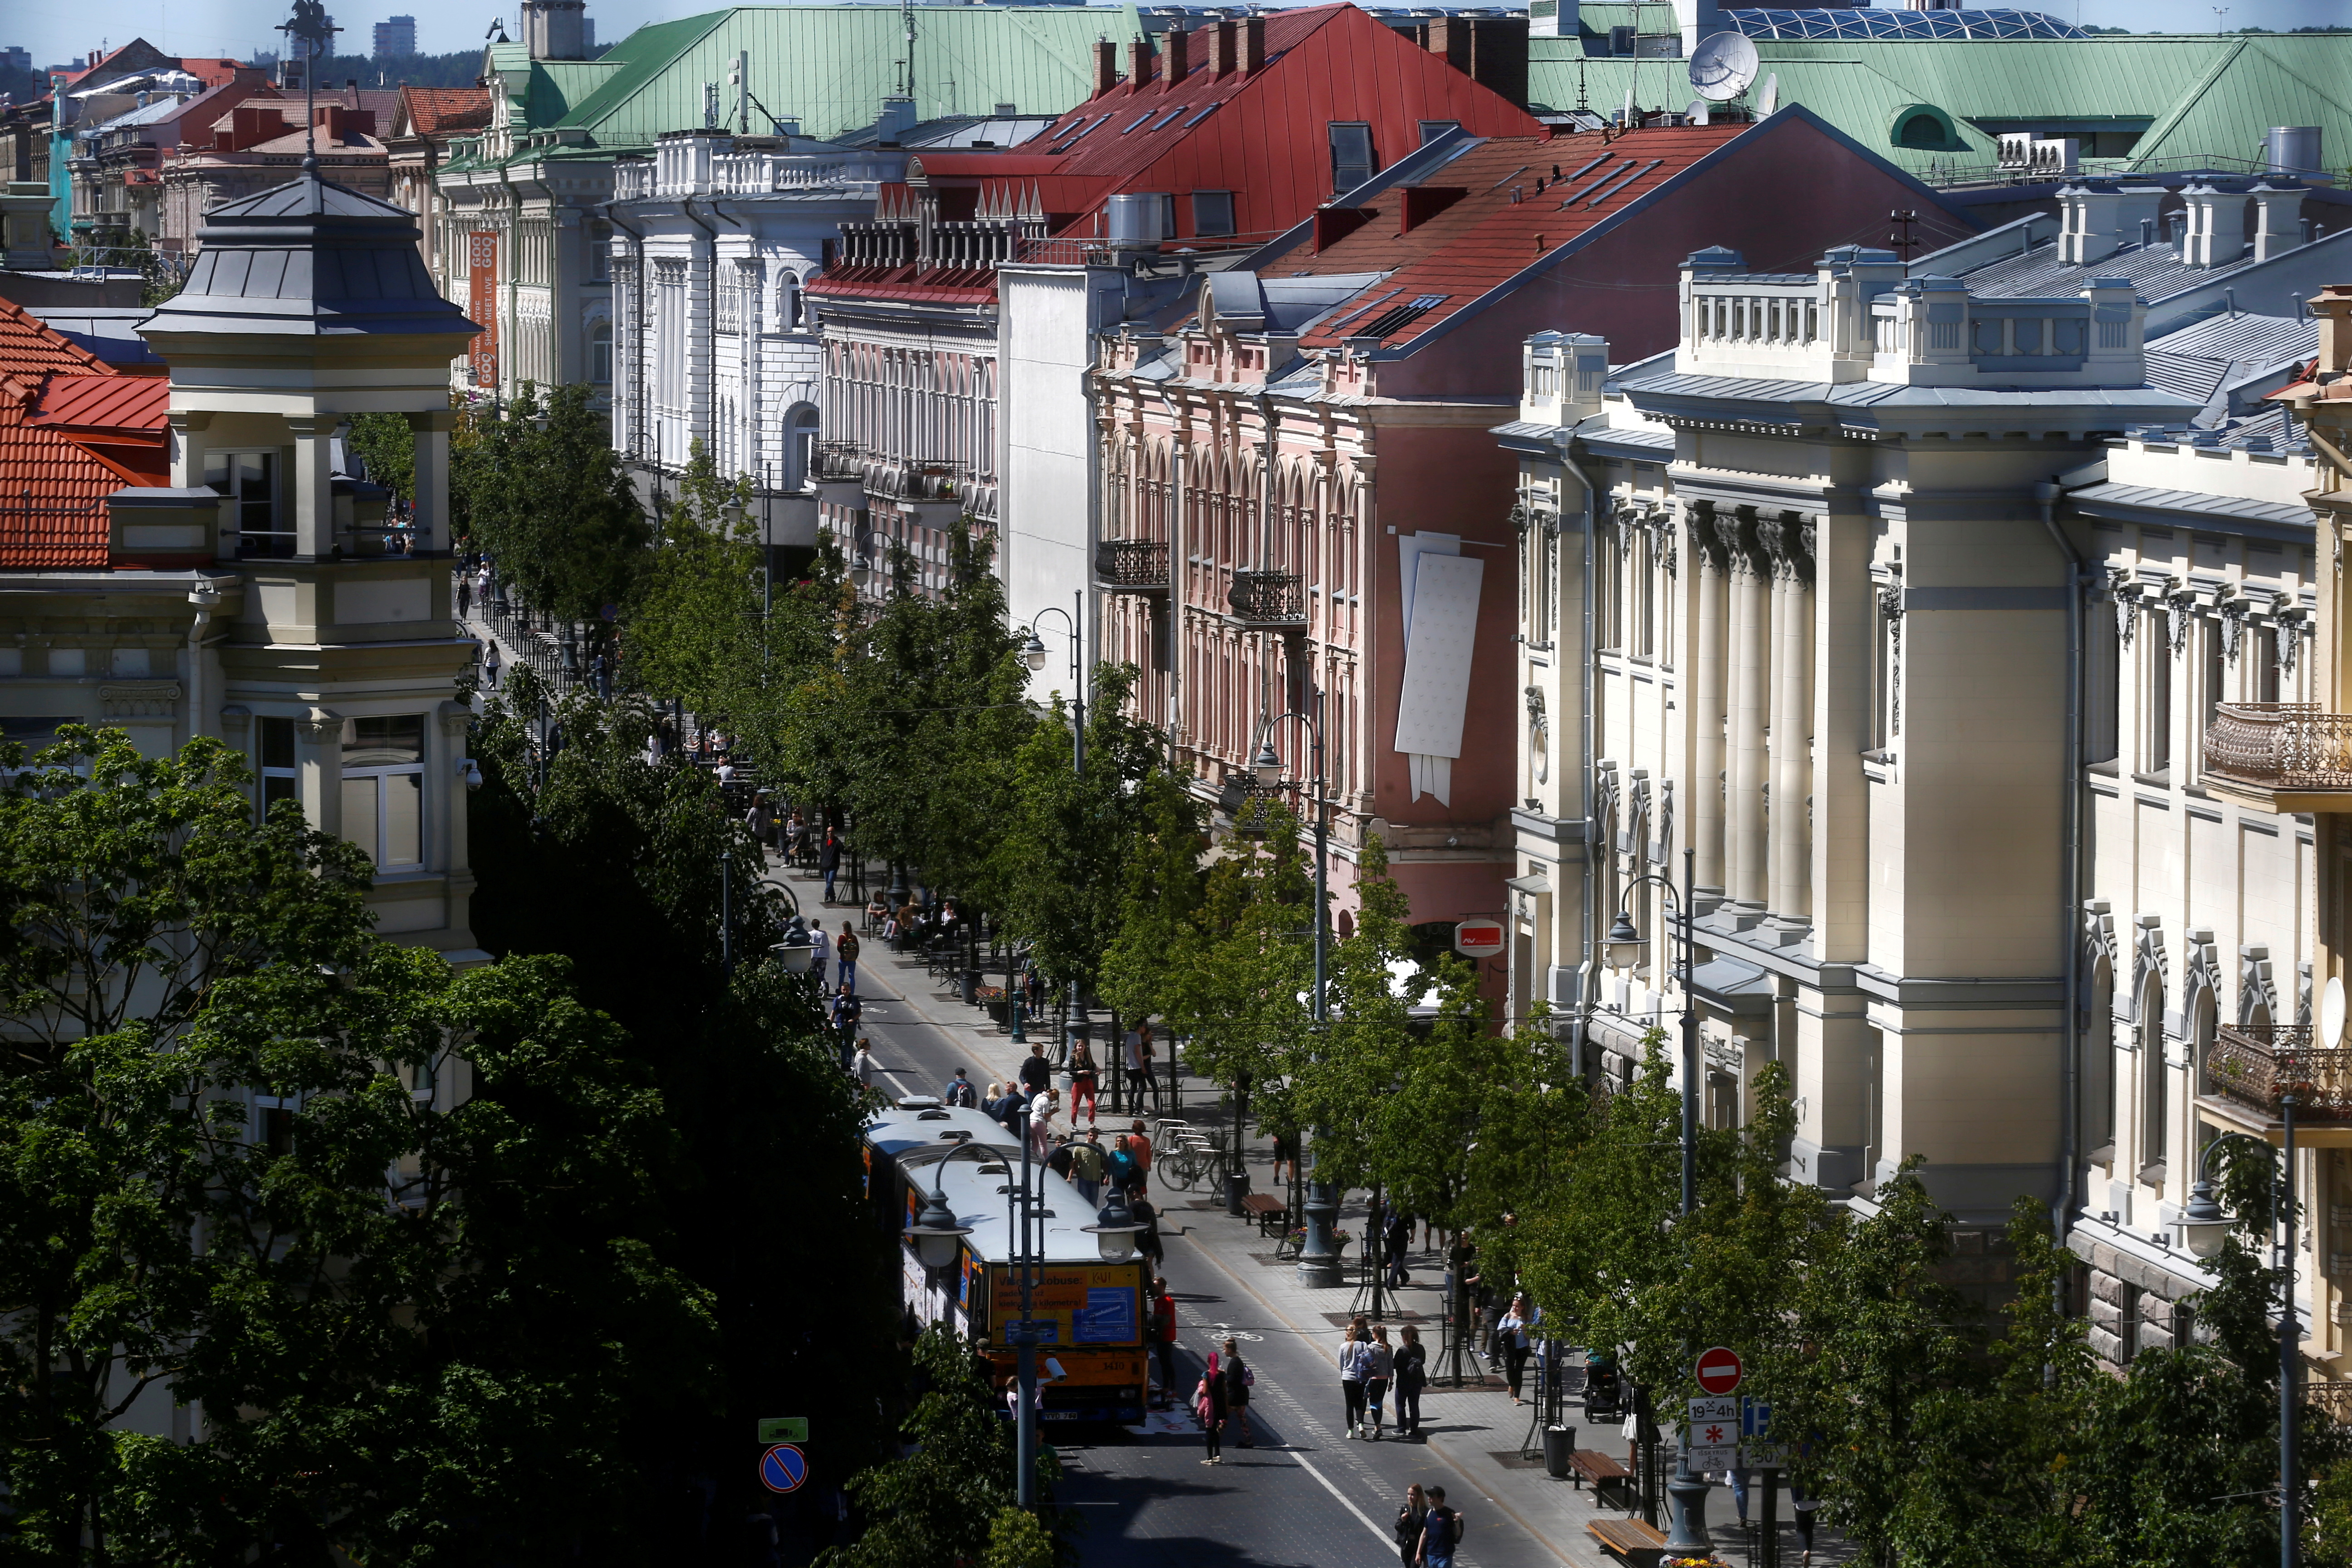 A view of Gediminas street in Vilnius, Lithuania